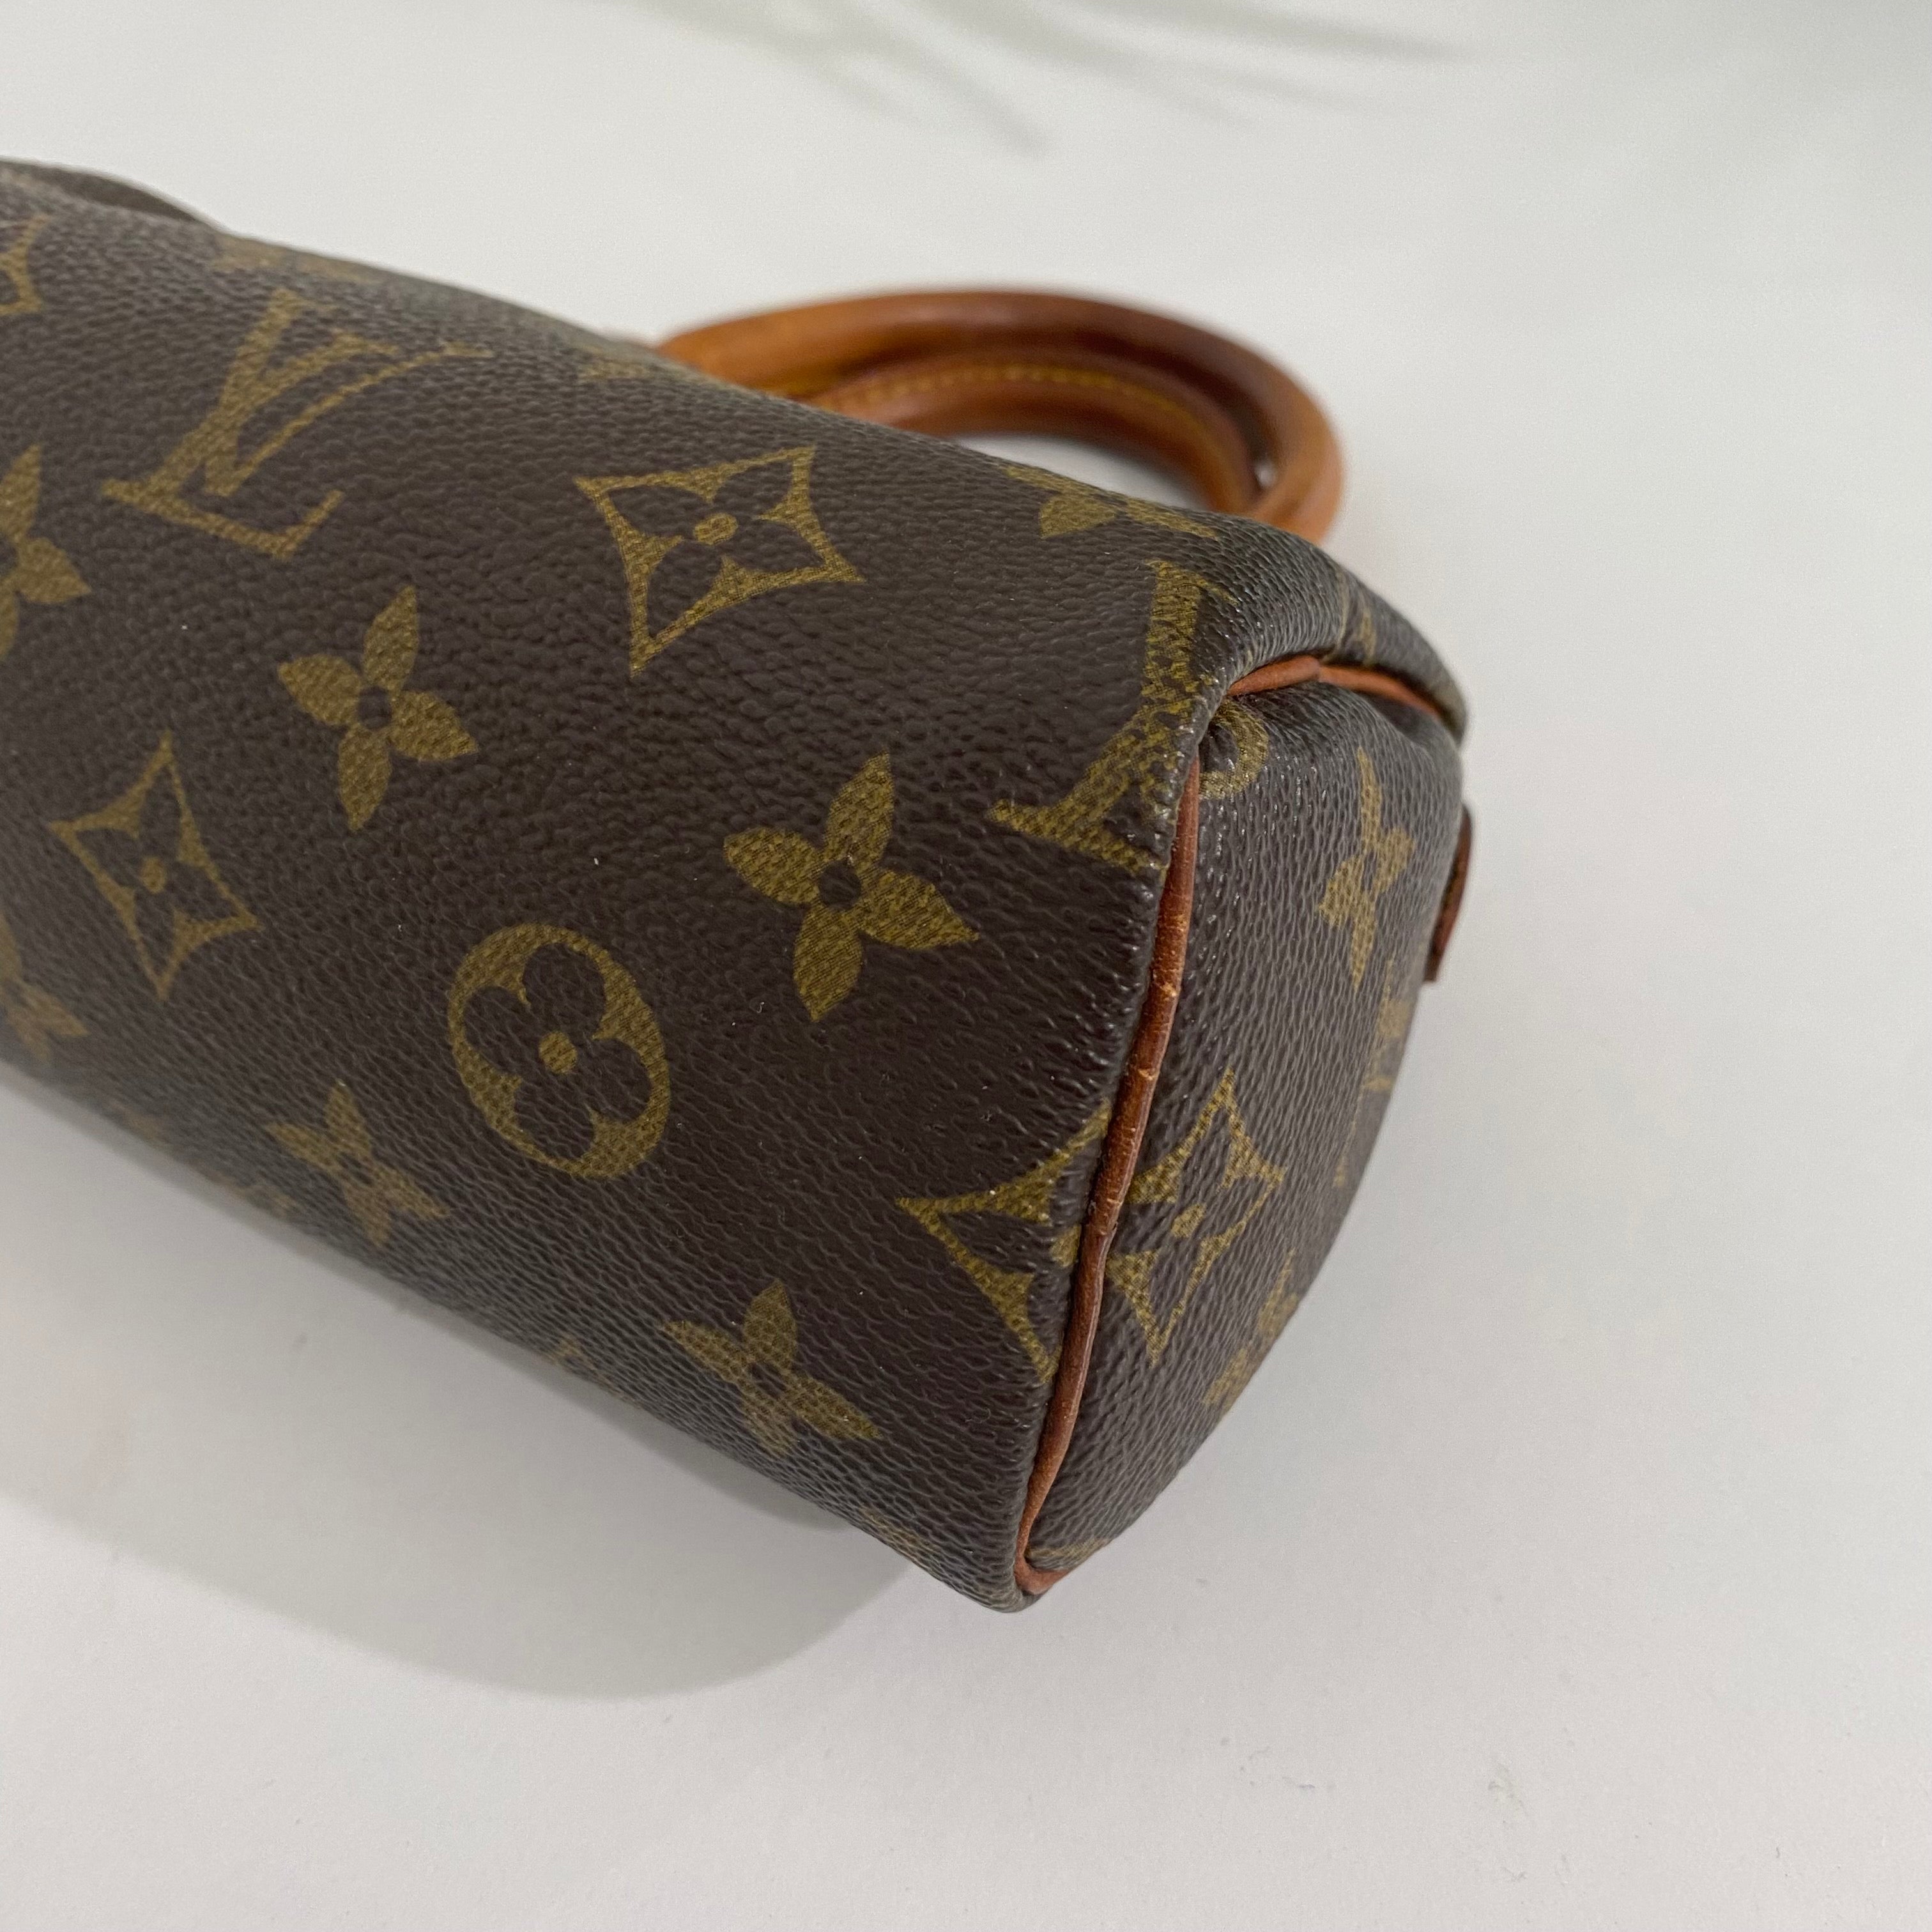 Louis Vuitton Speedy Nano ○ Labellov ○ Buy and Sell Authentic Luxury